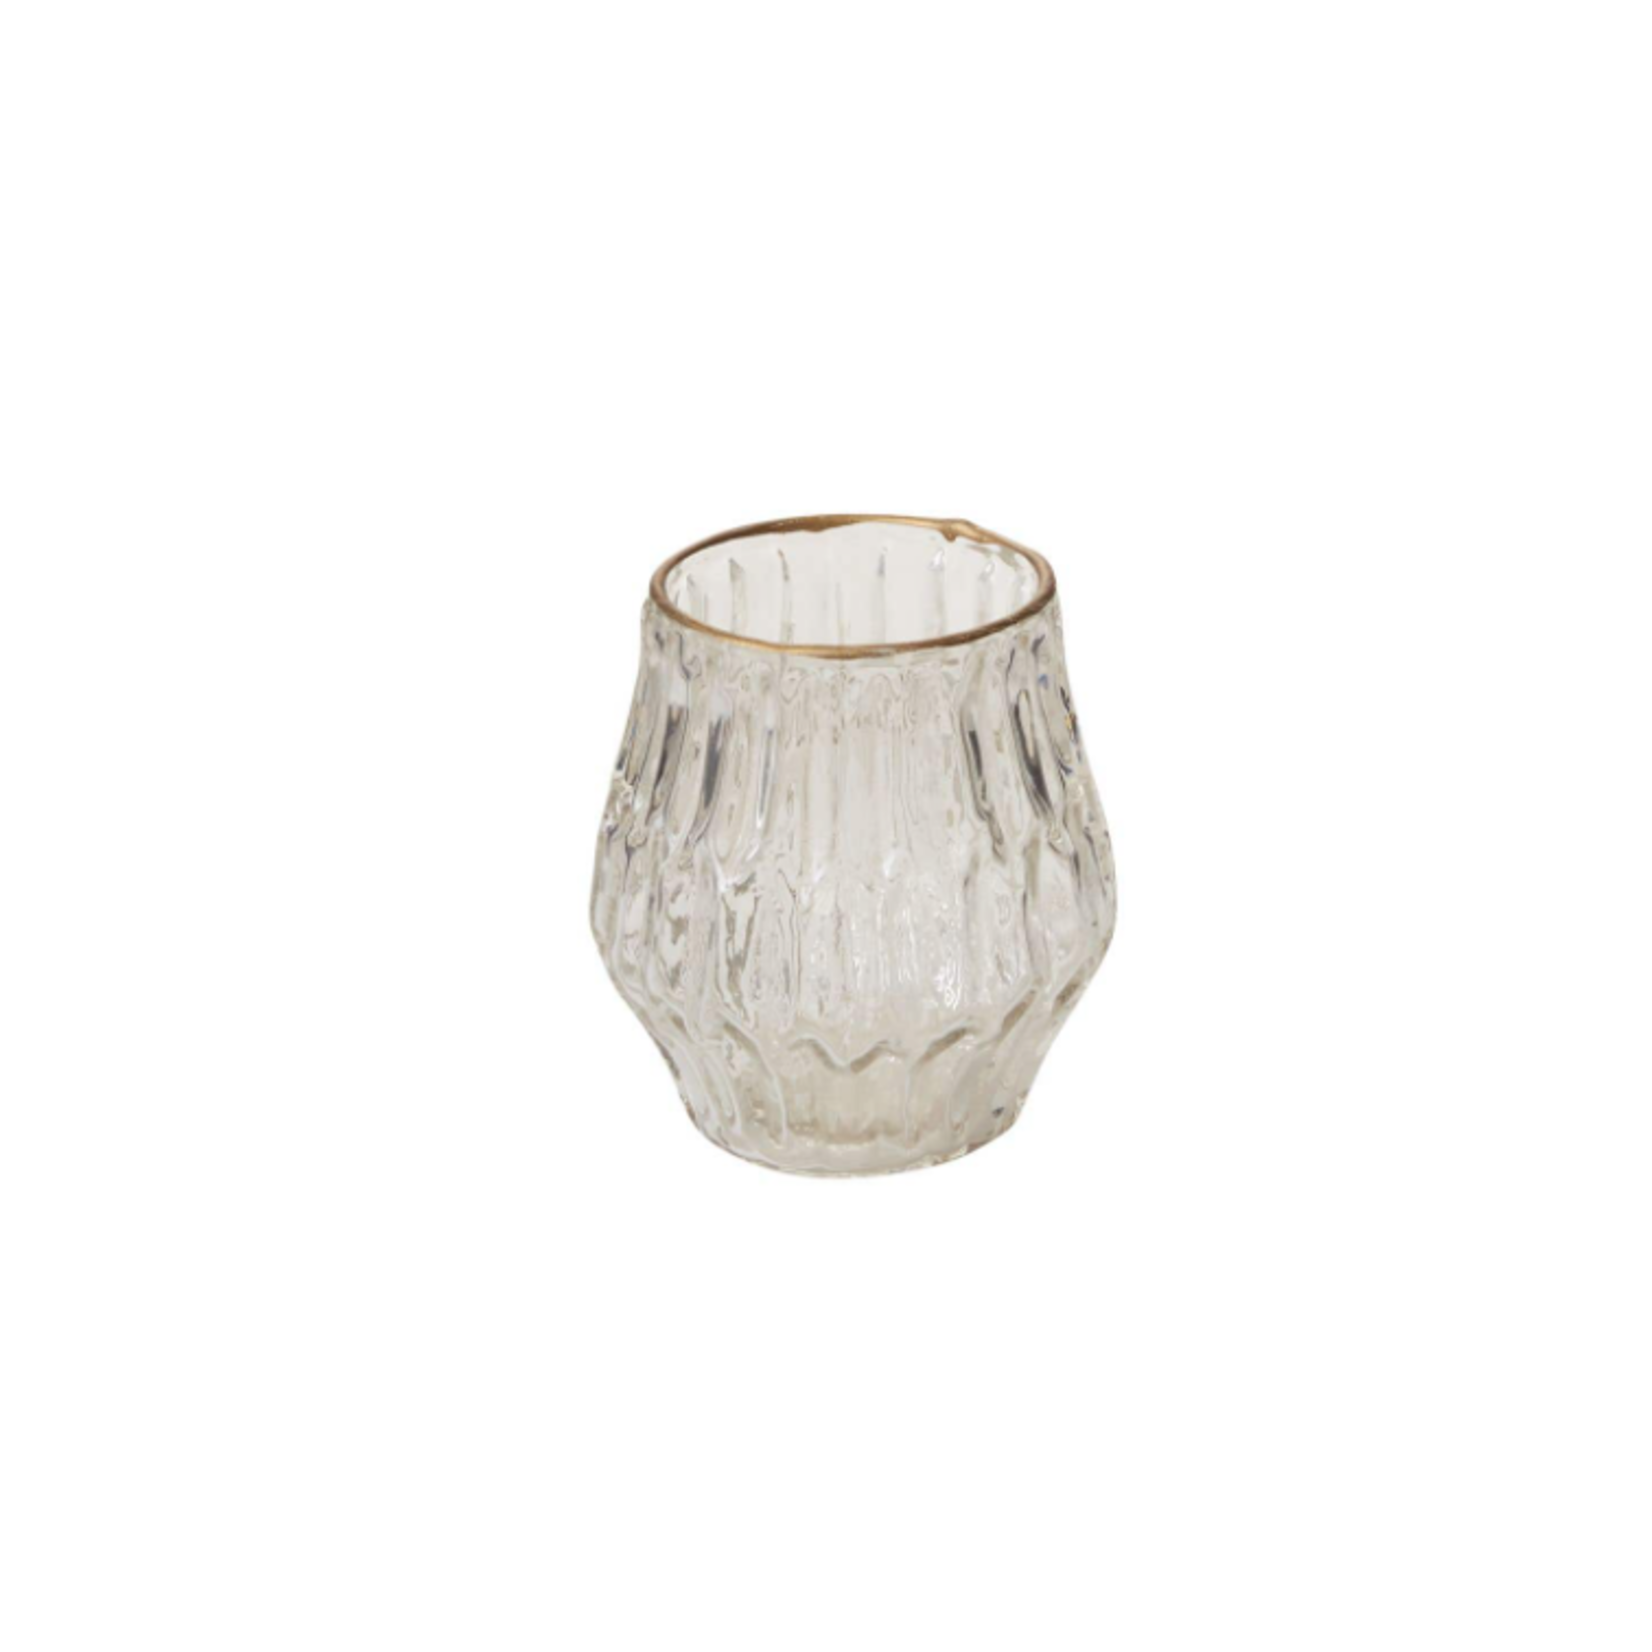 4”H X 3.5” CLEAR GLASS KATHERINE VOTIVE WITH GOLD LIP